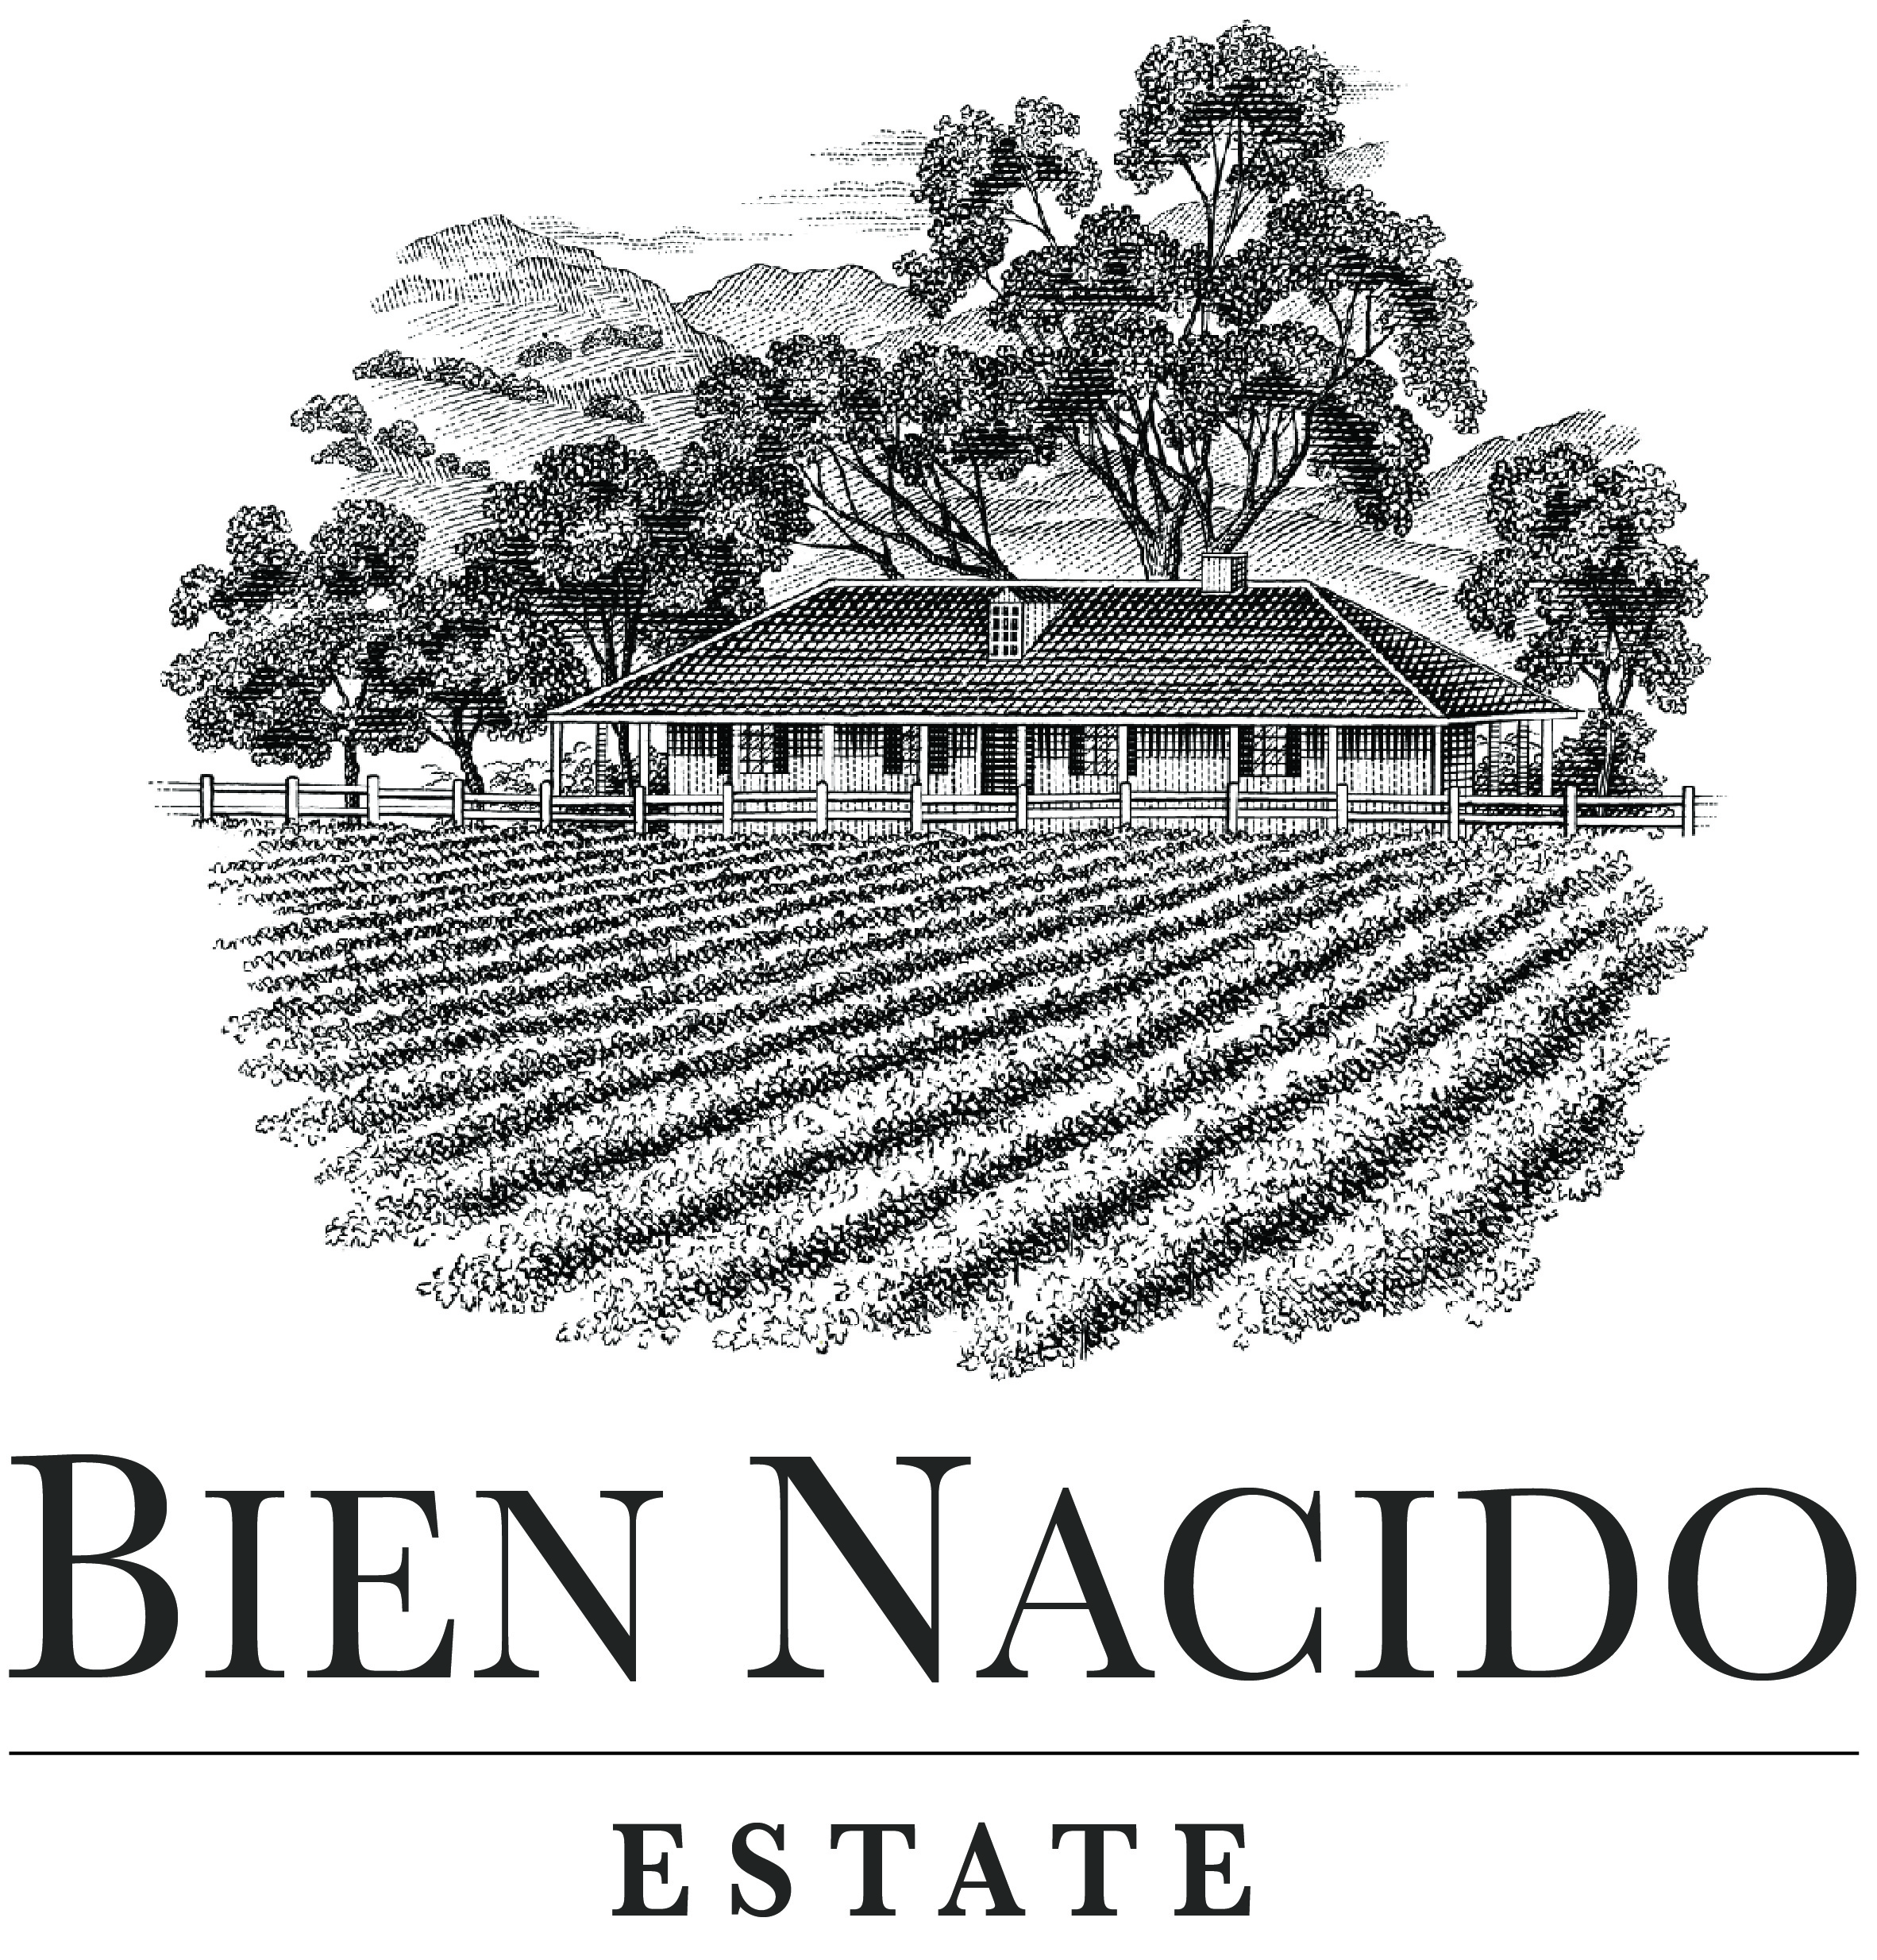 A History of the Bien Nacido Vineyard presented by the Miller Family Wine Company